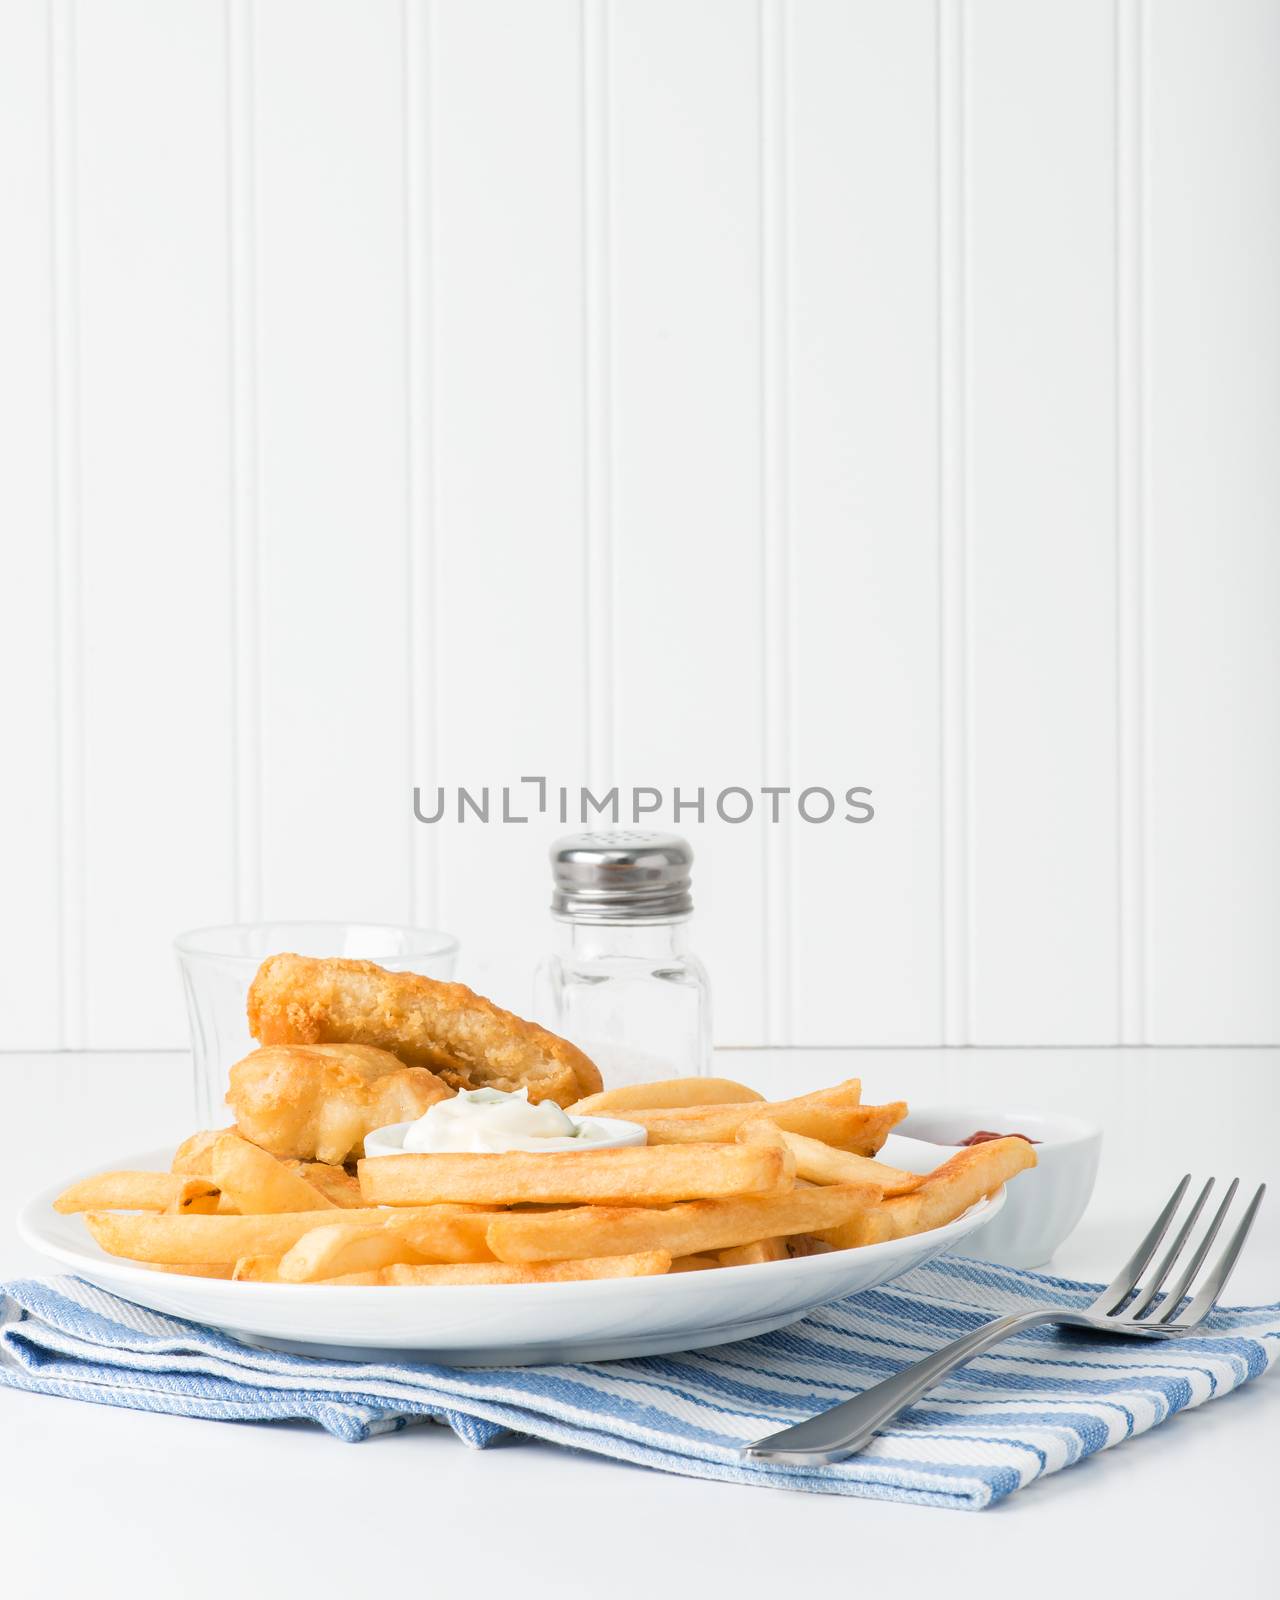 Deep fried potatoes are the main focus of the plate of fish and chips.